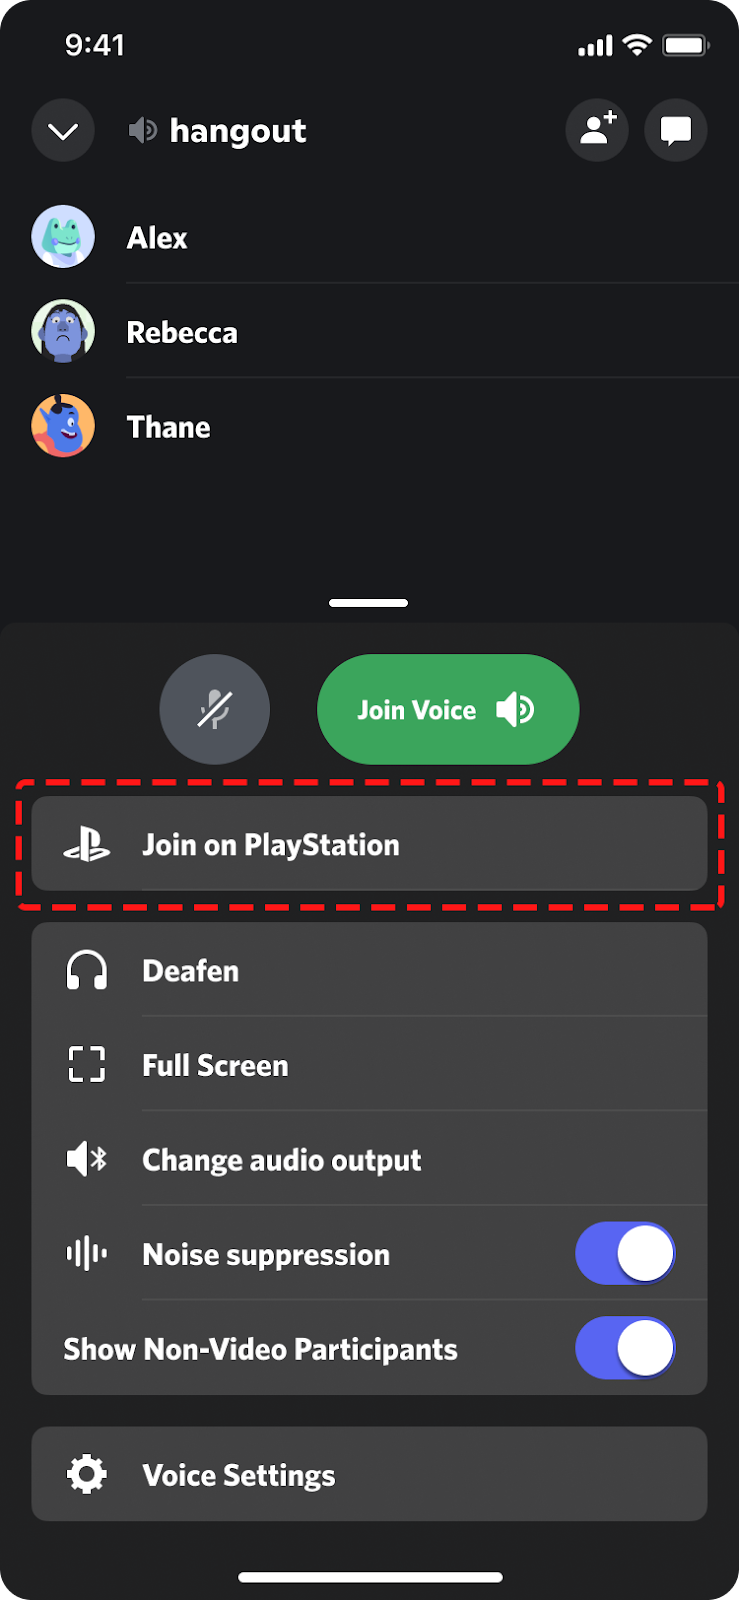 PlayStation™App  Connect to your PlayStation world on Android and iOS